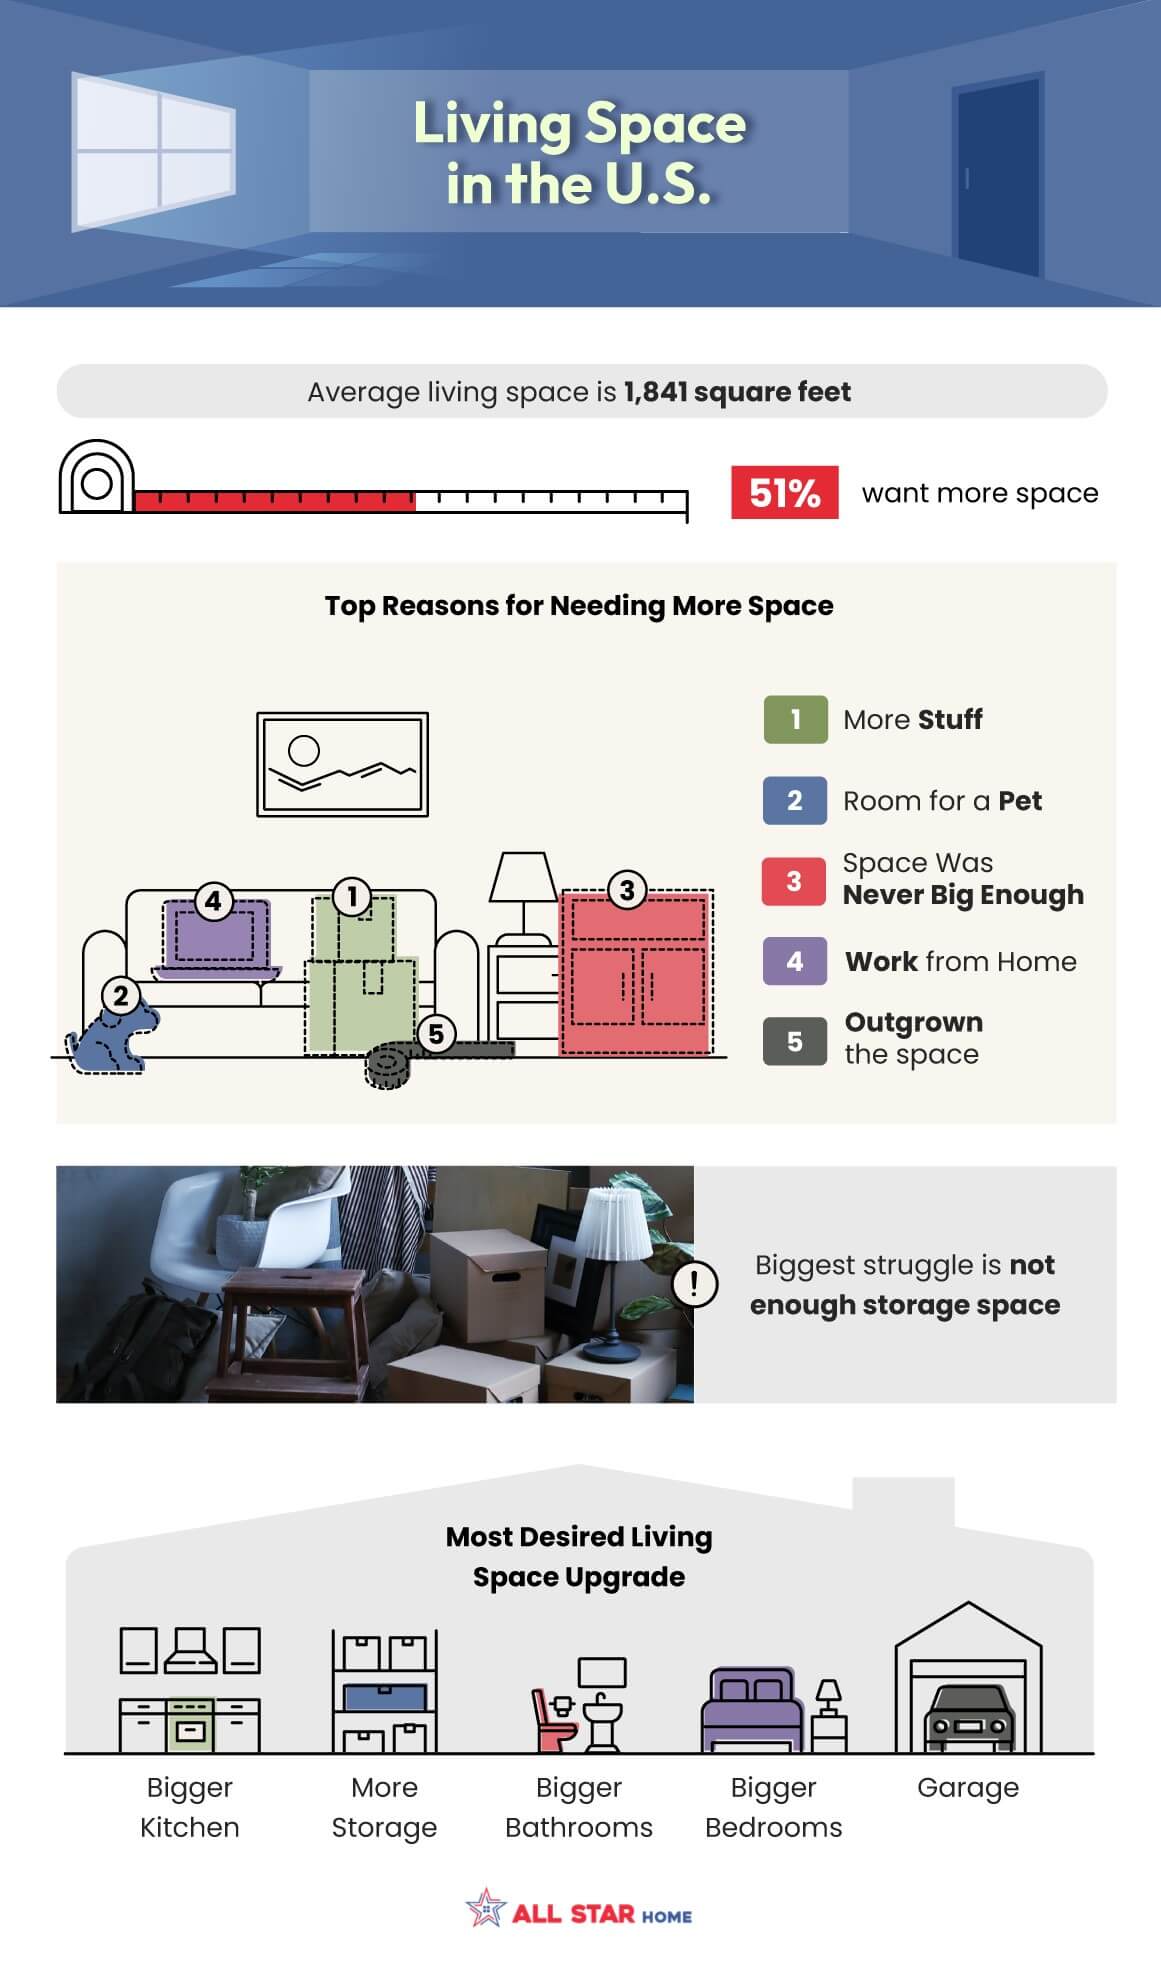 Top 5 reasons American homeowners want more space - infographic from AllStarHome.com